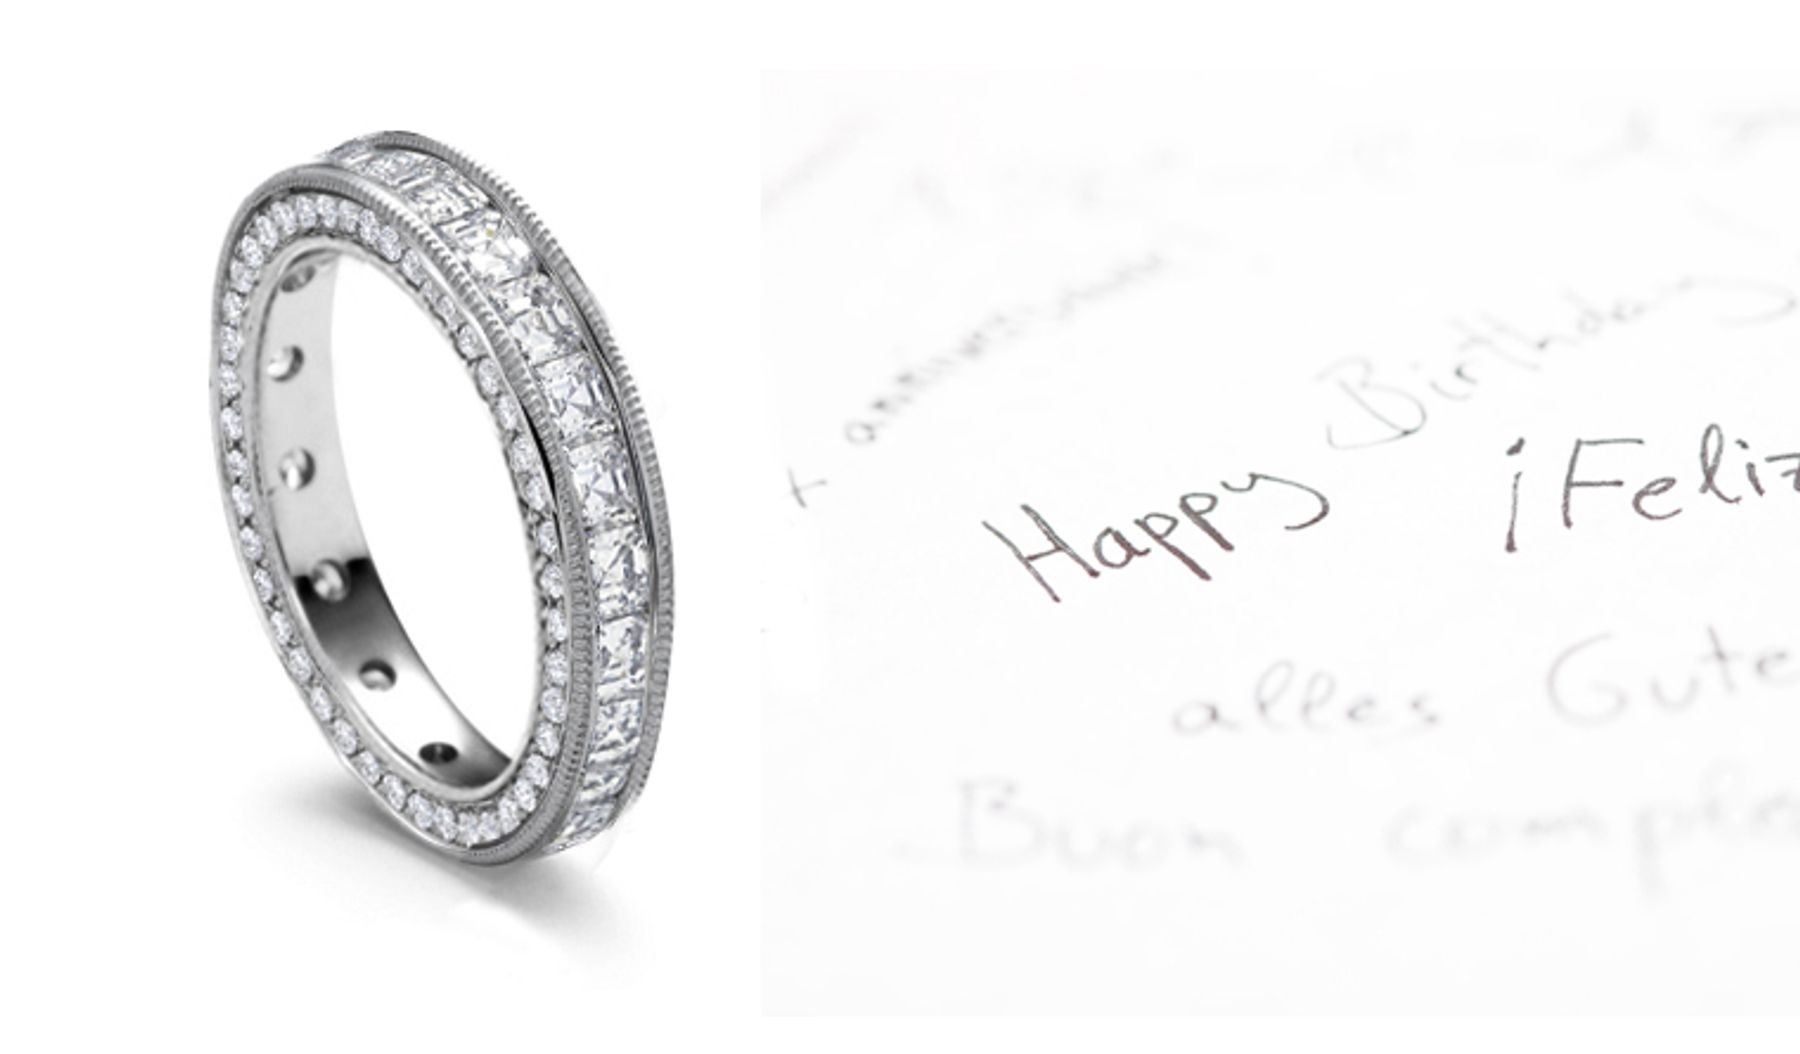 Ancient History of Beauty: Glittering Asscher Cut Diamonds are Channel Set with Spiraling Motifs on Platinum Band Sides